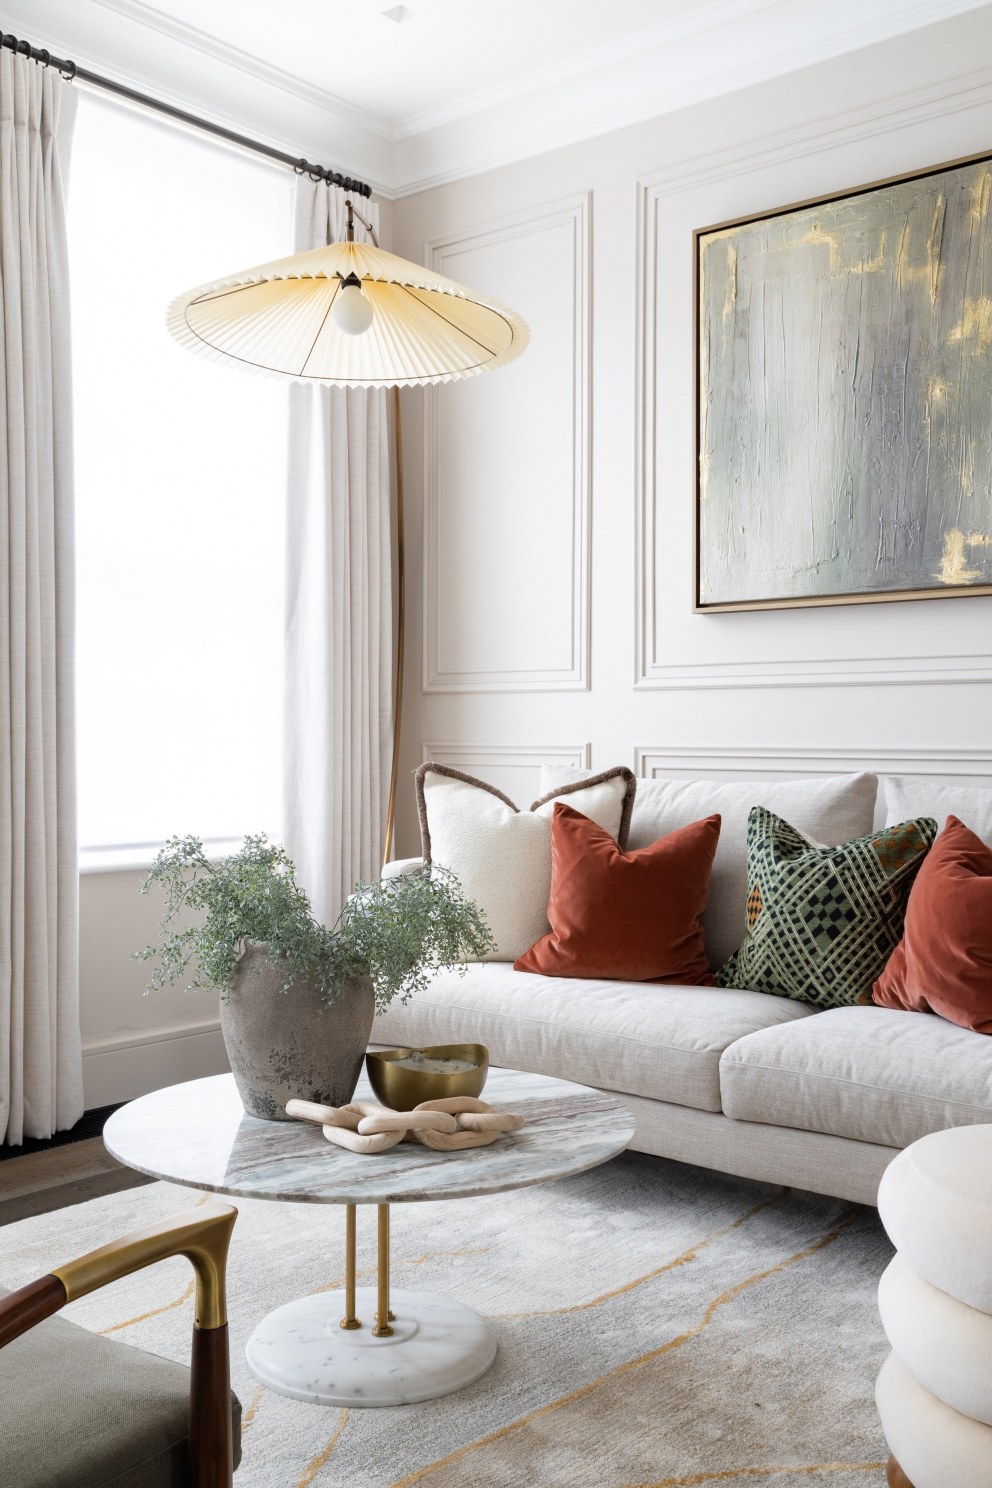 Kings Road Townhouse | living room  | Interior Designers